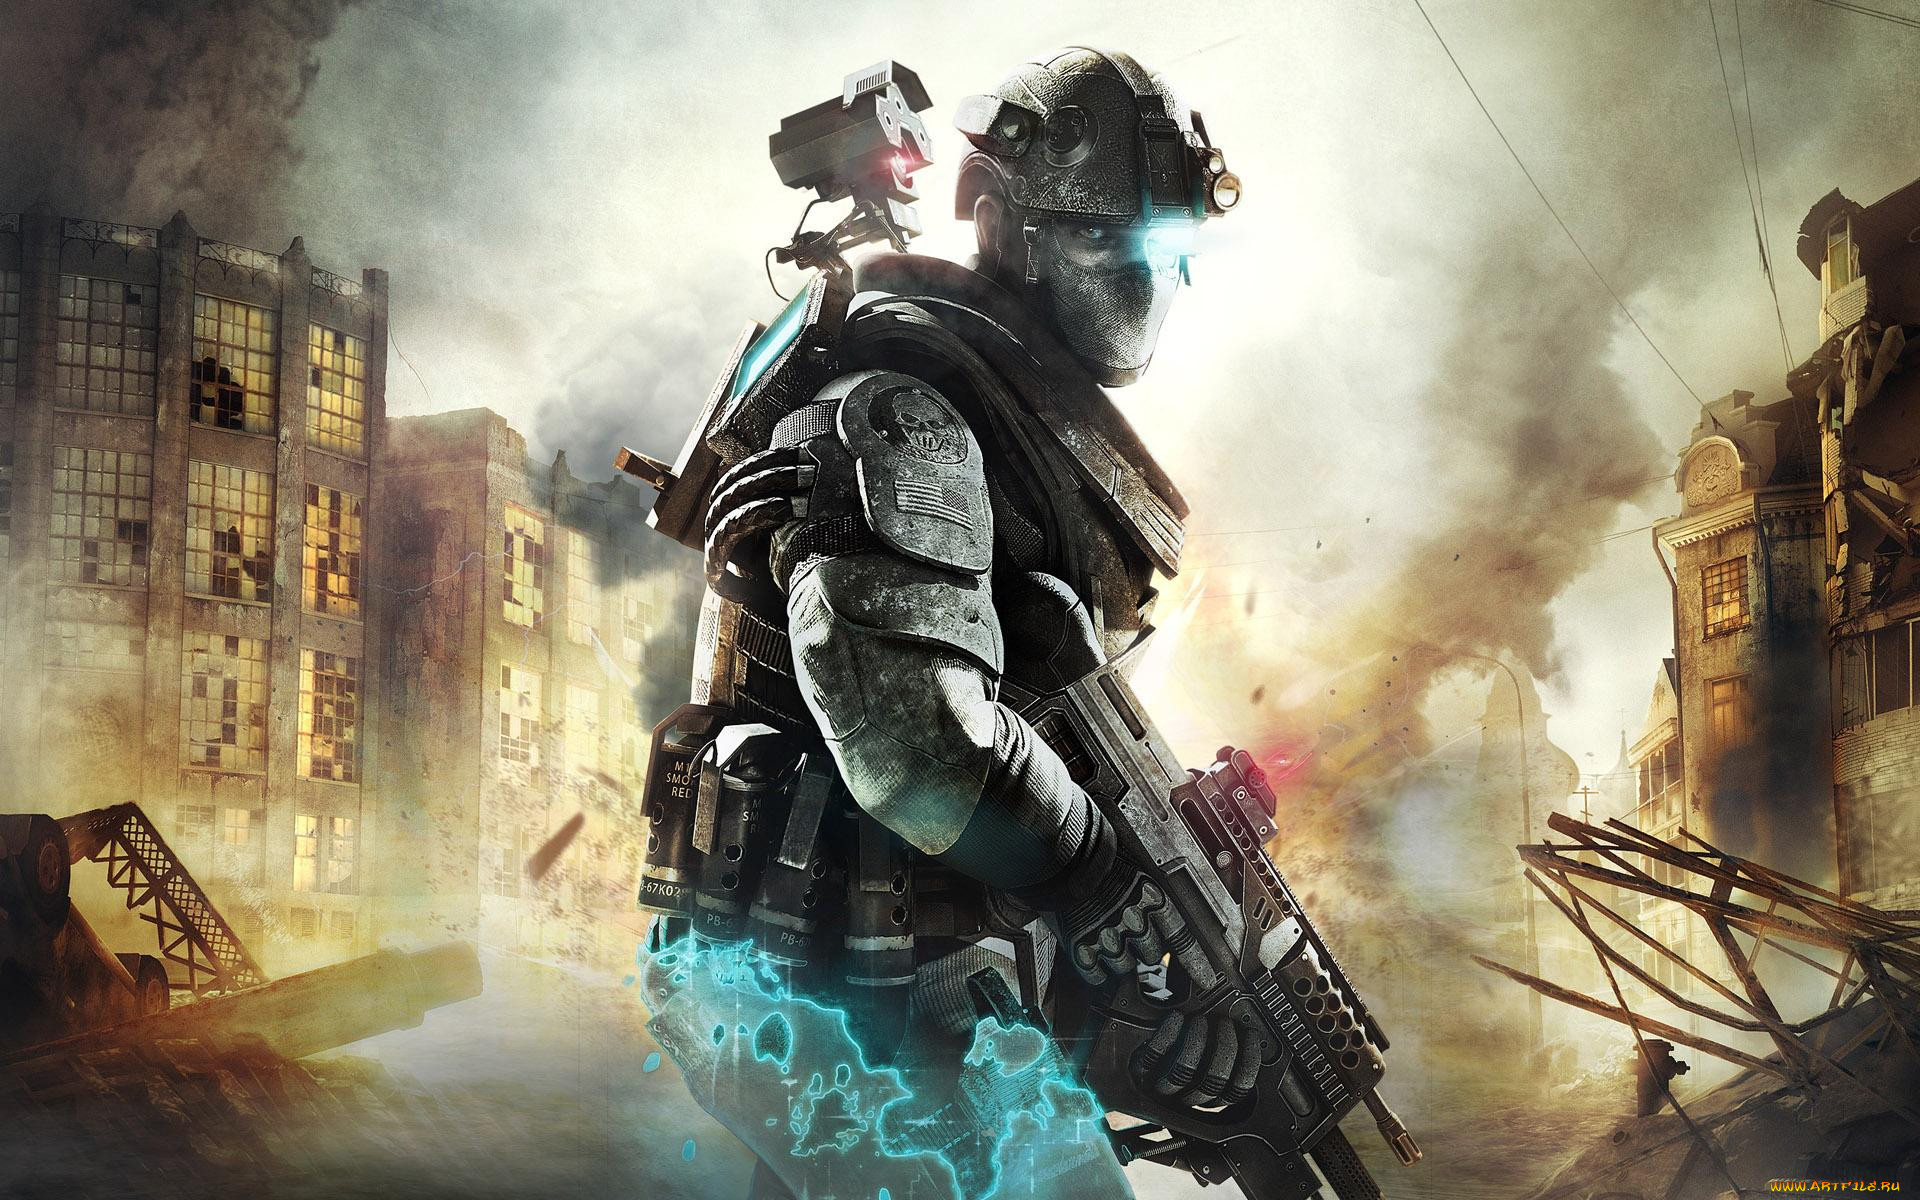  , ghost recon, , , , , , , , , , , 